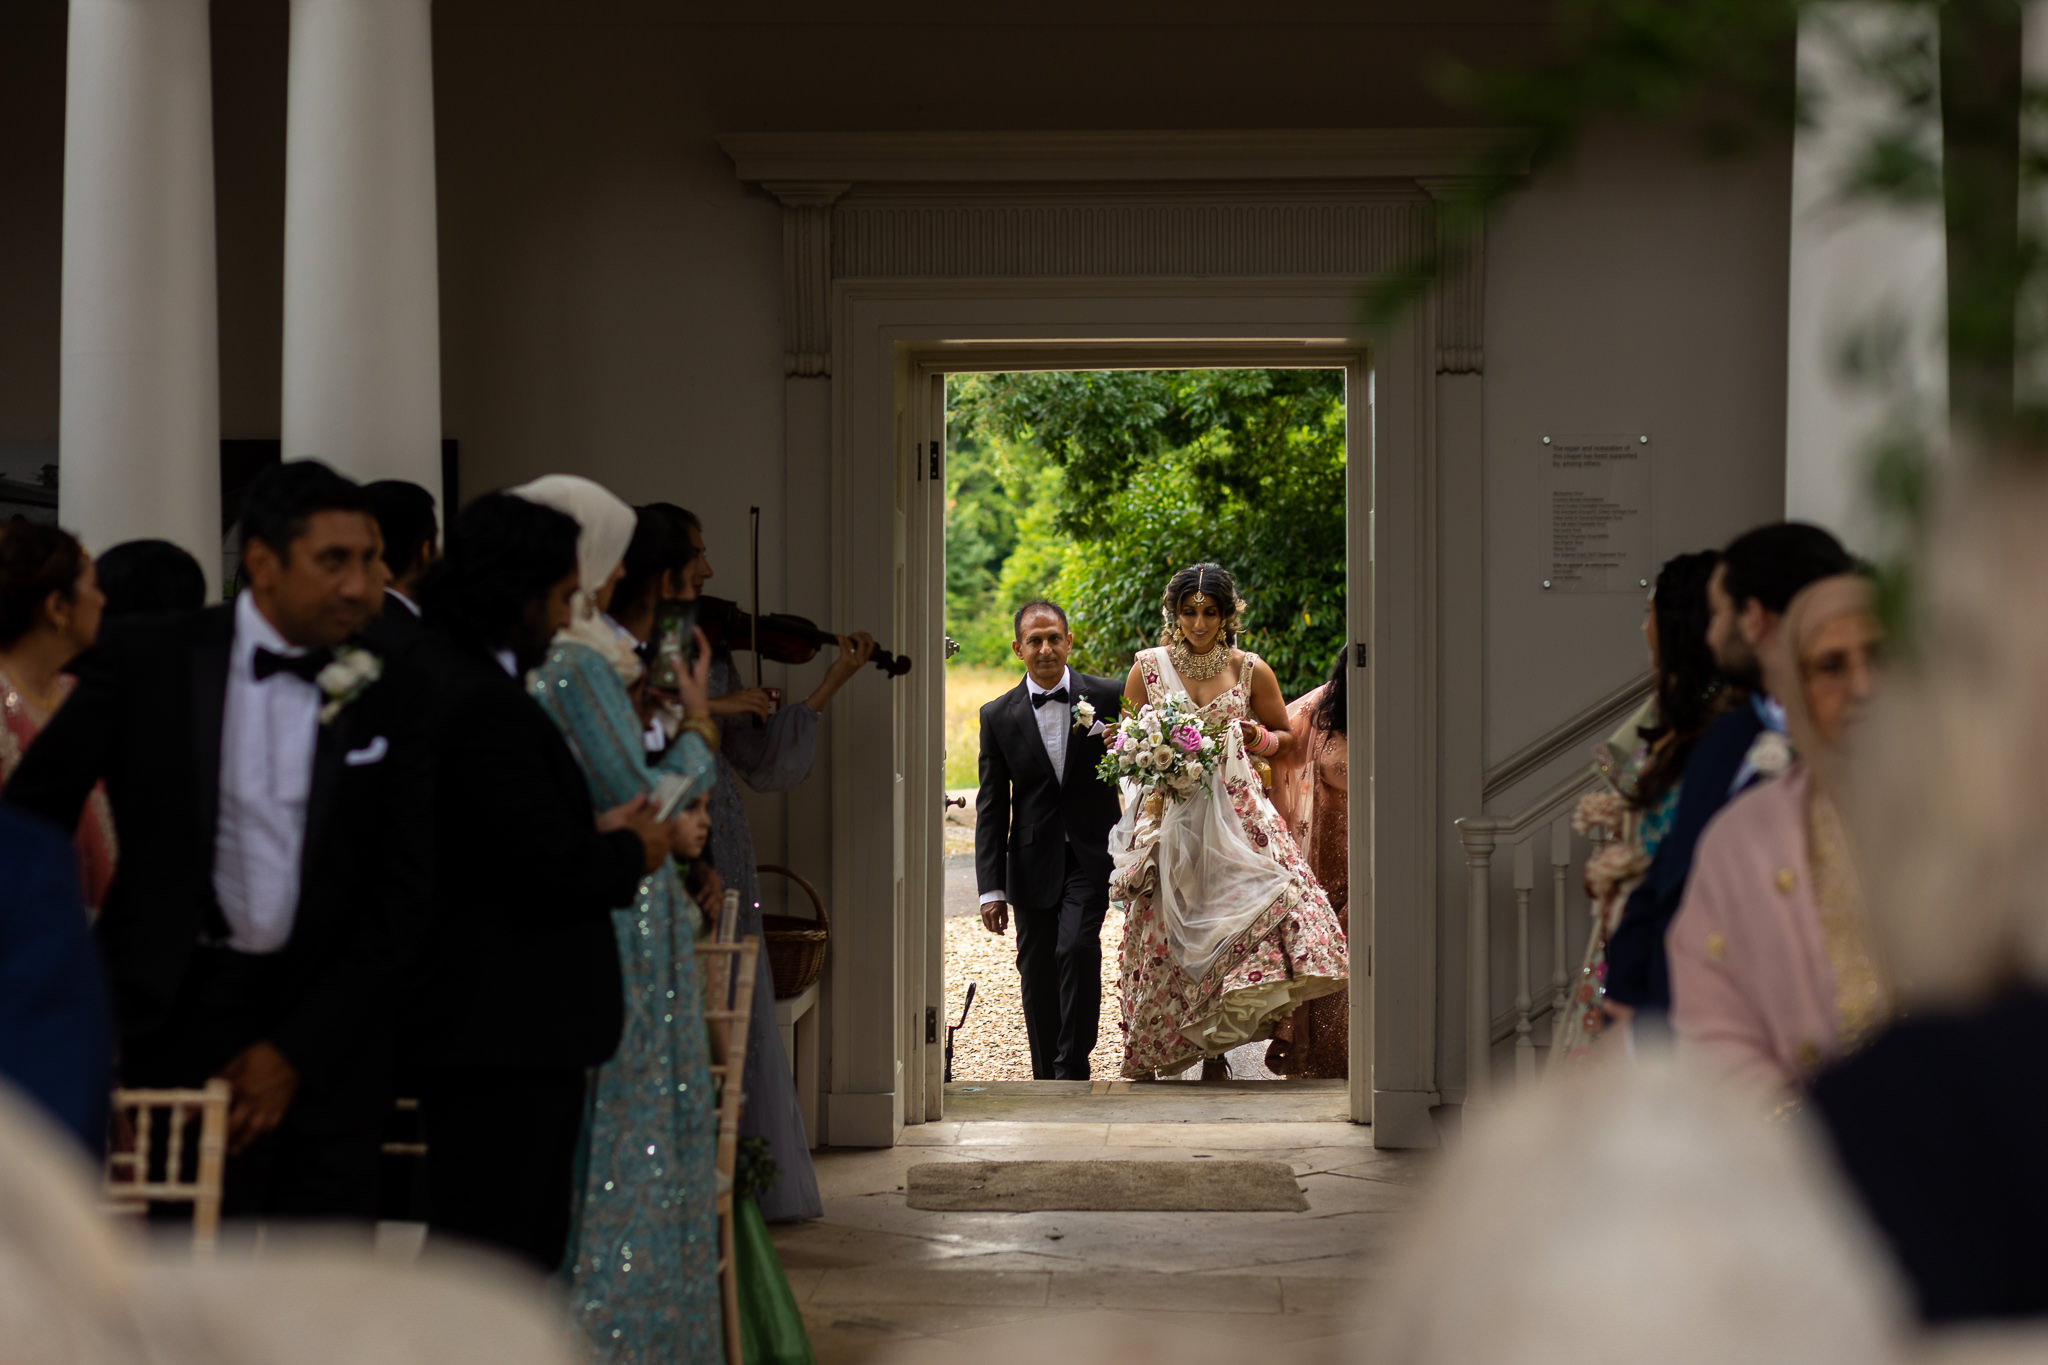 Bridal entrance into the chapel at Compton Verney